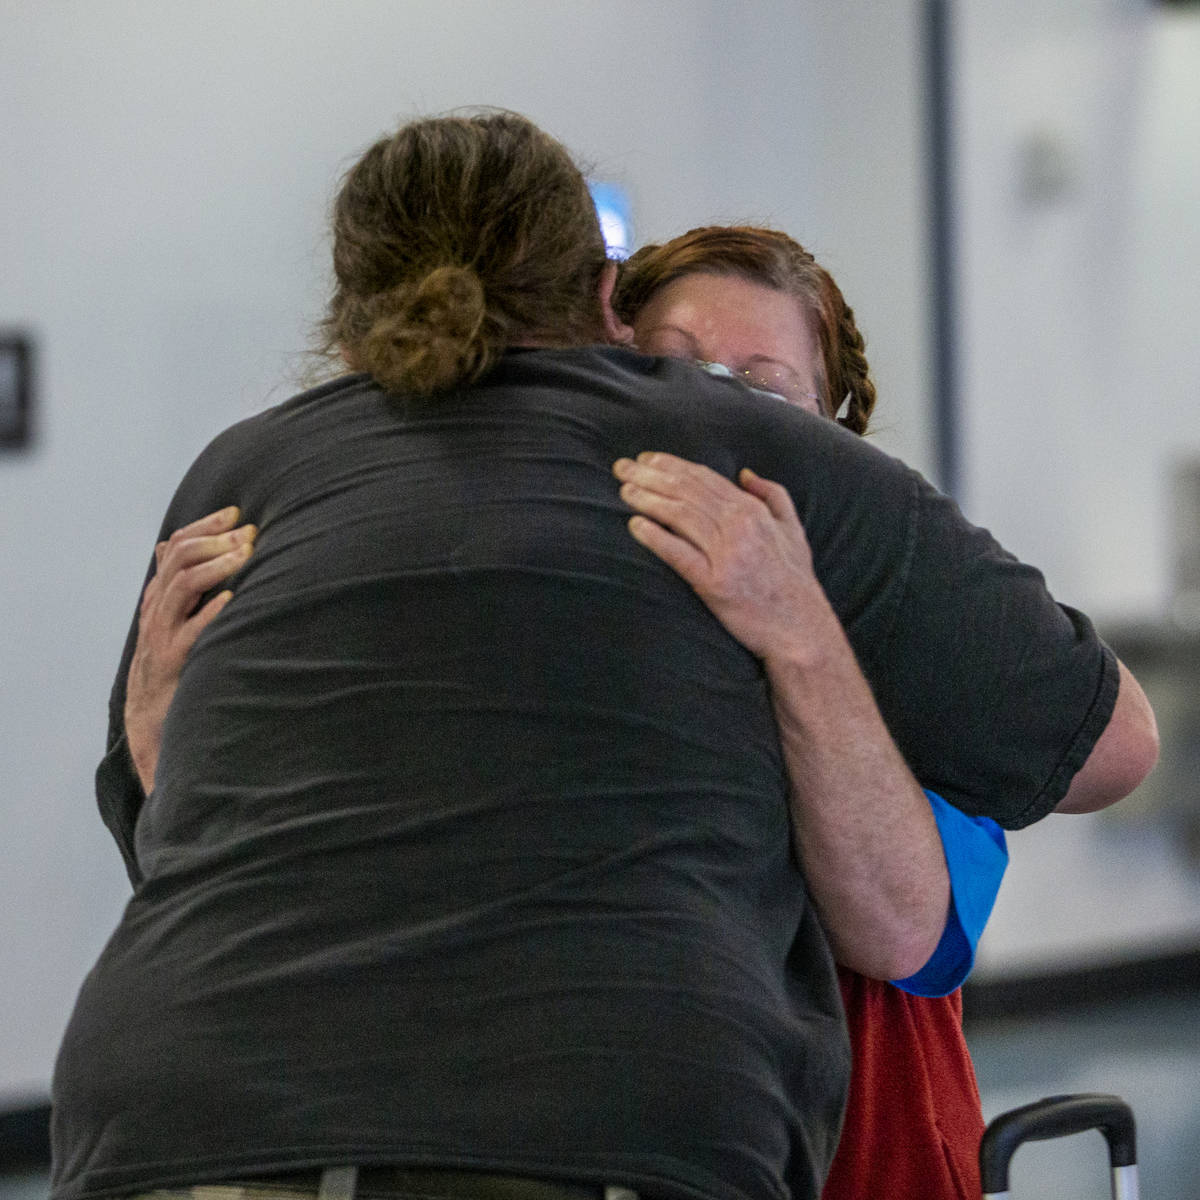 Jack Yowell hugs his wife Susan as she arrives at the Terminal 1 baggage claim in McCarran Inte ...